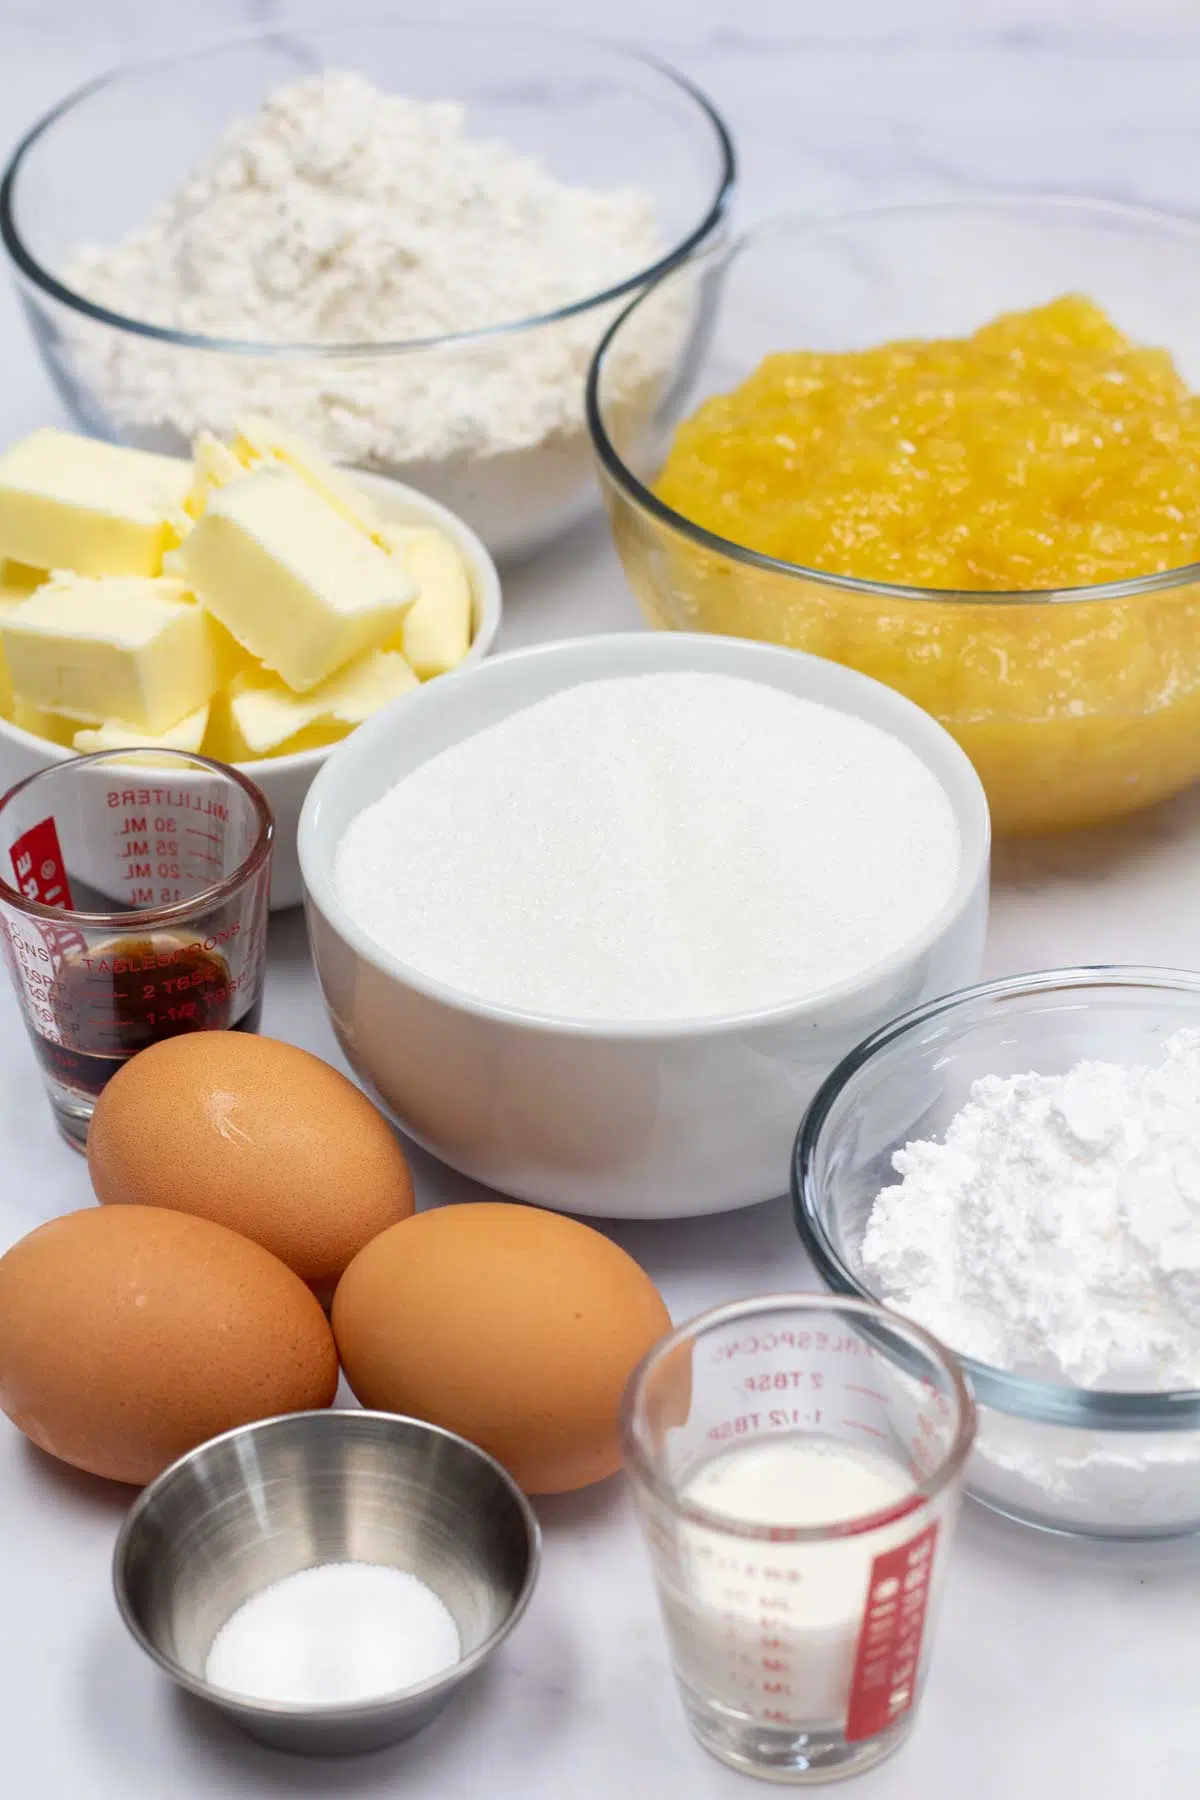 Tall image showing ingredients needed for pineapple pie bars.